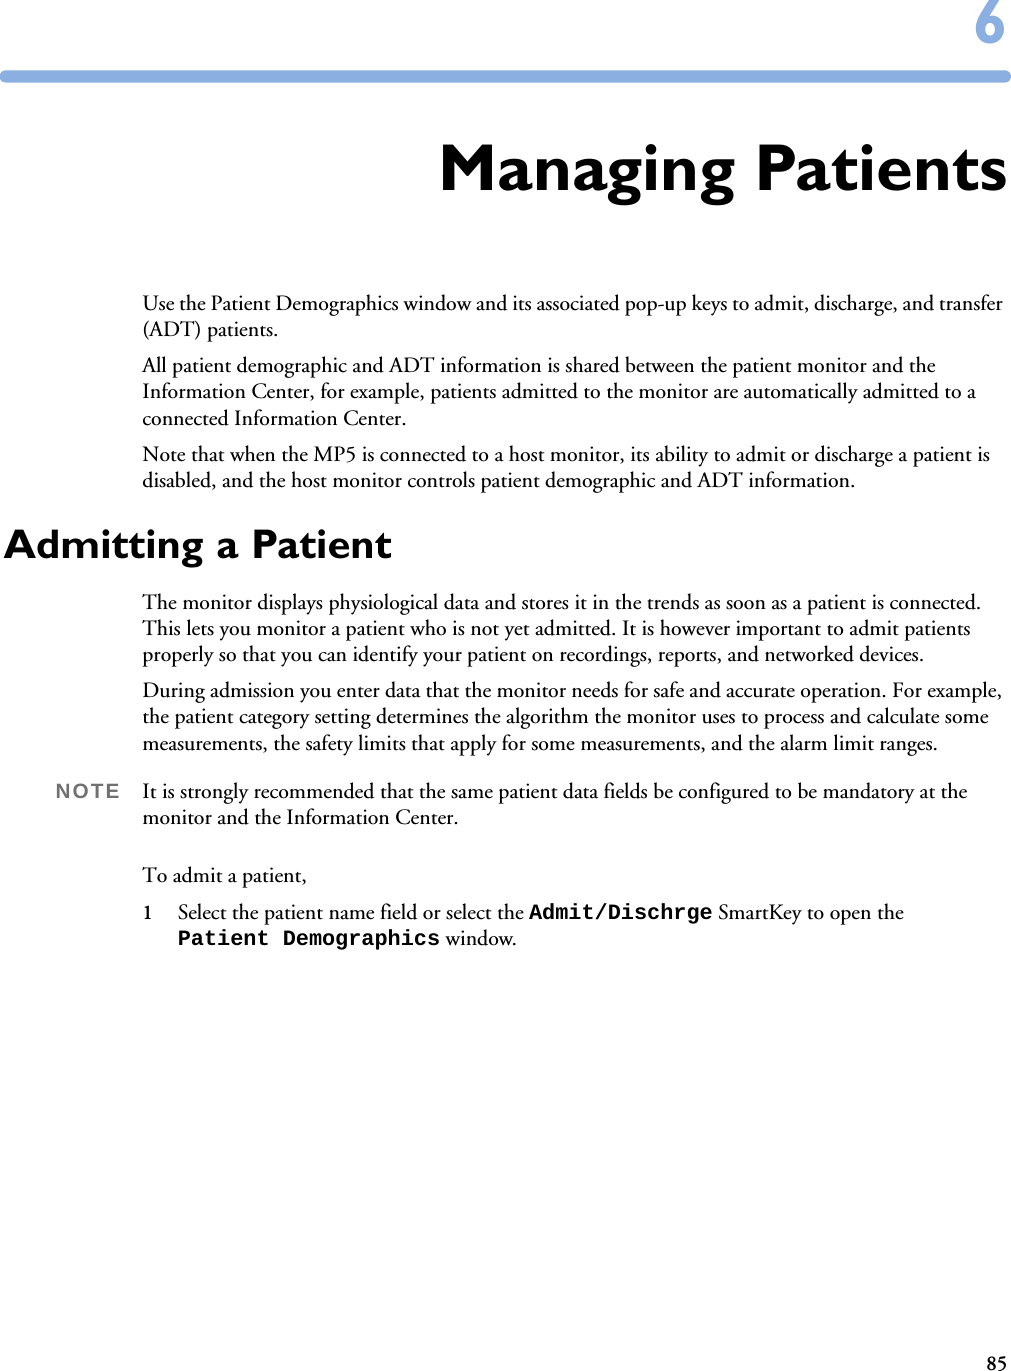 8566Managing PatientsUse the Patient Demographics window and its associated pop-up keys to admit, discharge, and transfer (ADT) patients. All patient demographic and ADT information is shared between the patient monitor and the Information Center, for example, patients admitted to the monitor are automatically admitted to a connected Information Center.Note that when the MP5 is connected to a host monitor, its ability to admit or discharge a patient is disabled, and the host monitor controls patient demographic and ADT information.Admitting a PatientThe monitor displays physiological data and stores it in the trends as soon as a patient is connected. This lets you monitor a patient who is not yet admitted. It is however important to admit patients properly so that you can identify your patient on recordings, reports, and networked devices. During admission you enter data that the monitor needs for safe and accurate operation. For example, the patient category setting determines the algorithm the monitor uses to process and calculate some measurements, the safety limits that apply for some measurements, and the alarm limit ranges.NOTE It is strongly recommended that the same patient data fields be configured to be mandatory at the monitor and the Information Center. To admit a patient,1Select the patient name field or select the Admit/Dischrge SmartKey to open the Patient Demographics window.